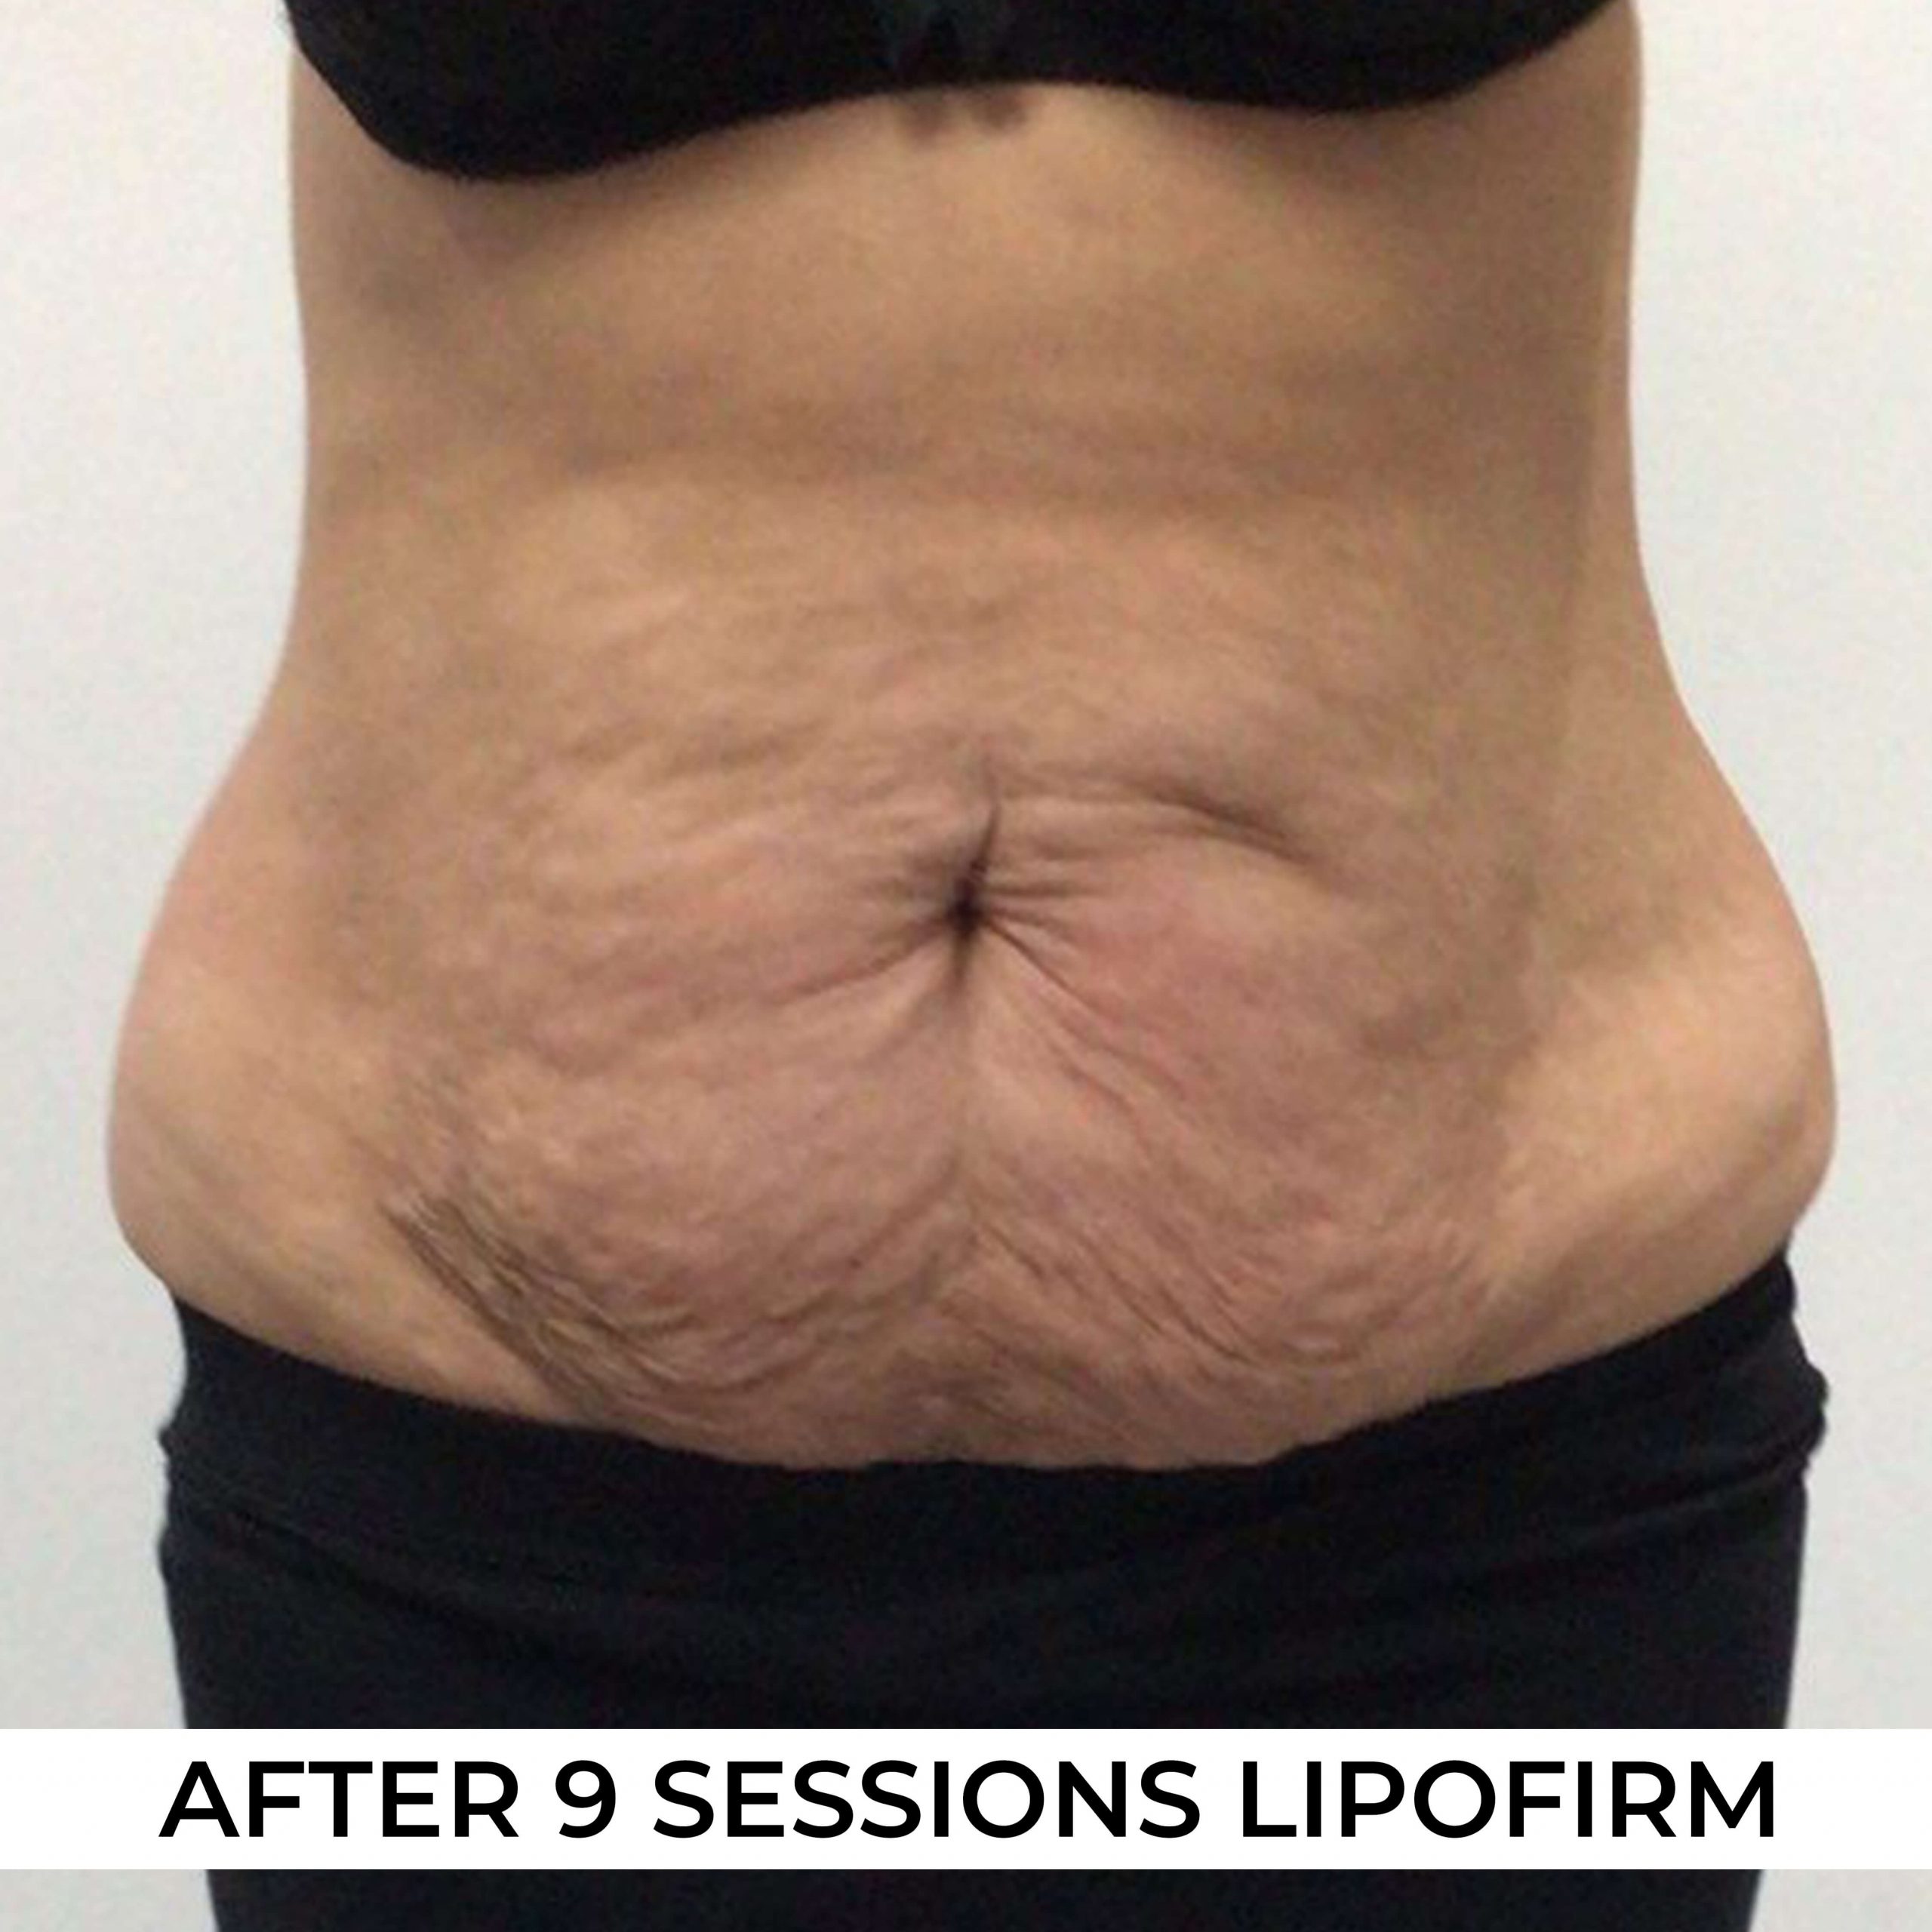 image of Lipofirm after 9 sessions